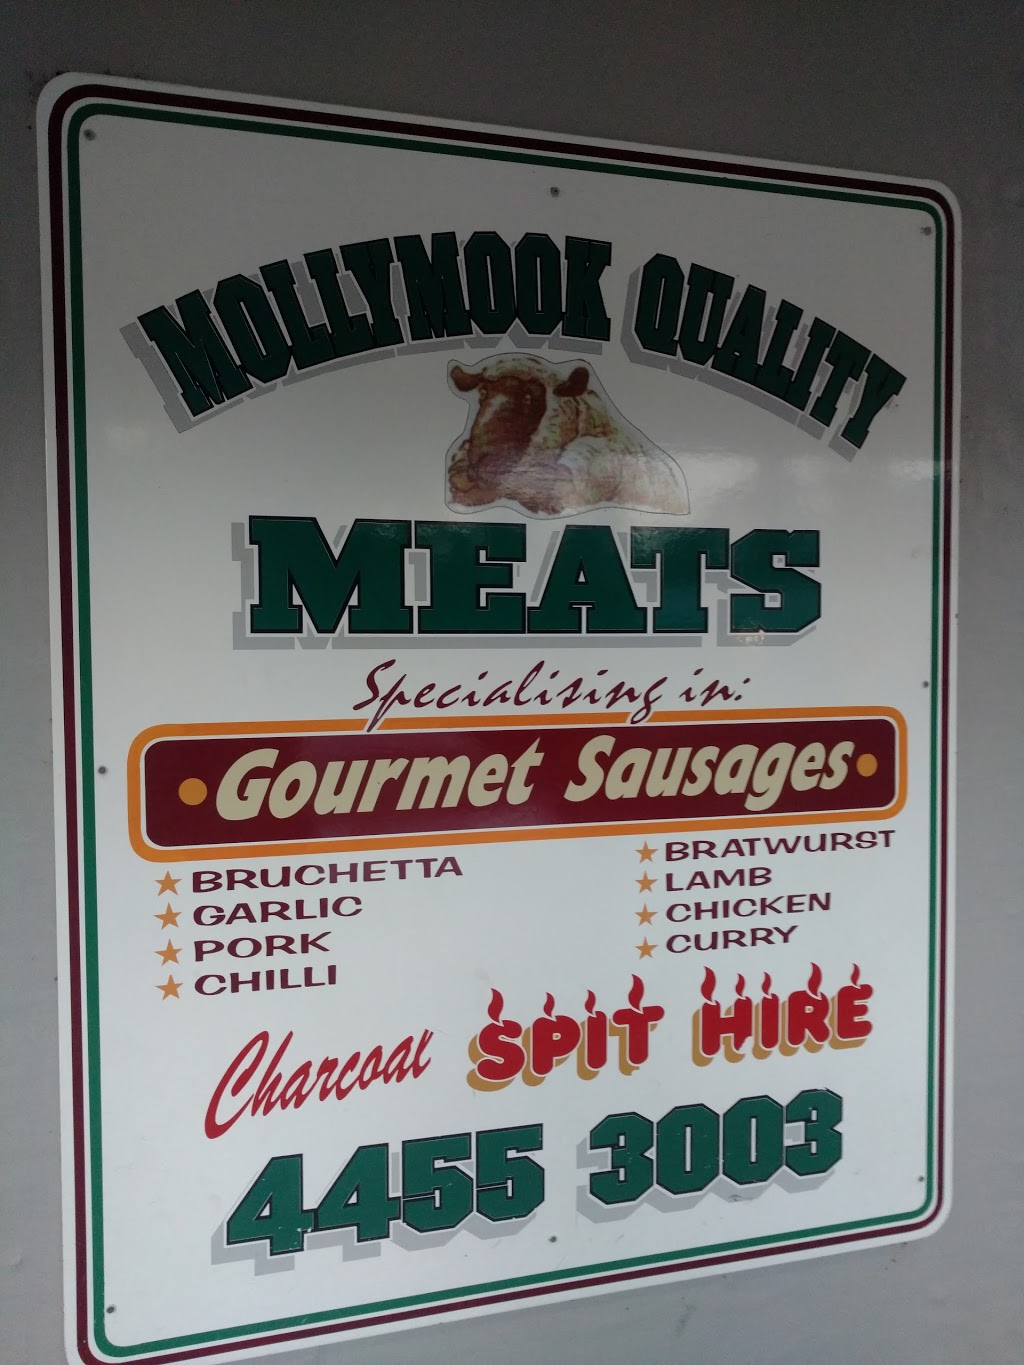 Mollymook Quality Meats | store | Tallwood Ave, Narrawallee NSW 2539, Australia | 0244553003 OR +61 2 4455 3003